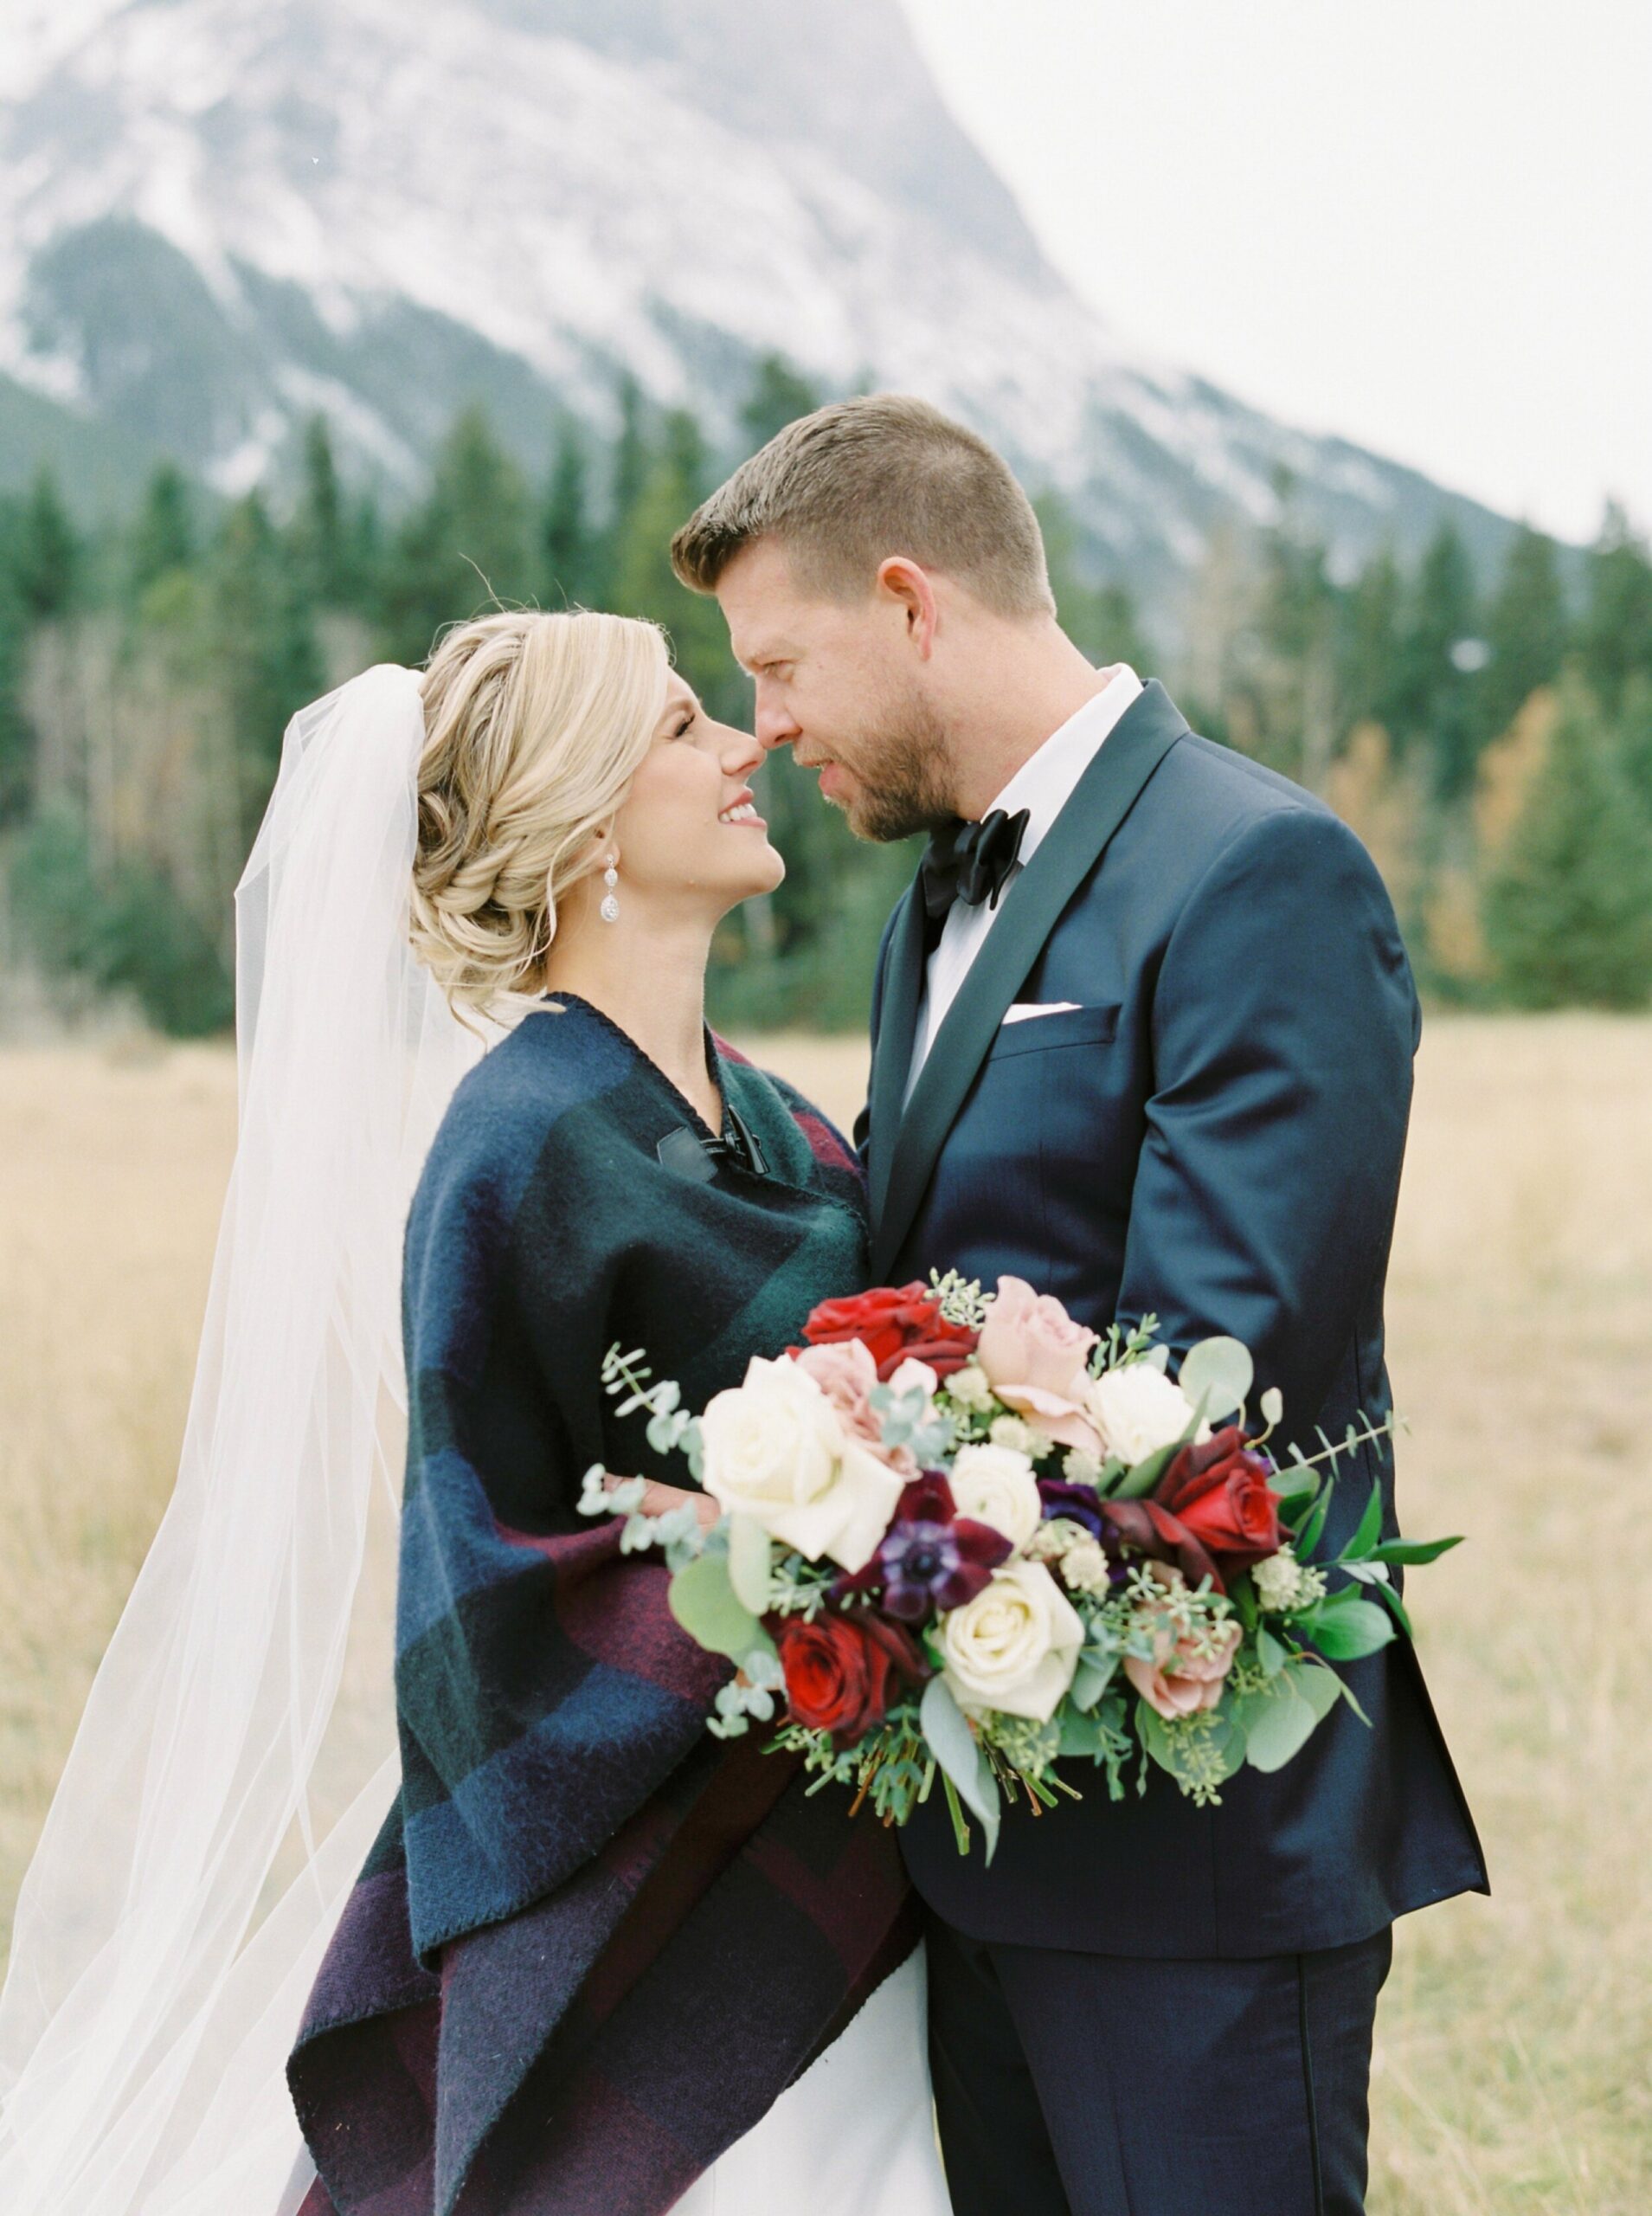  bride keeping warm in plaid shawl for winter wedding in the mountains | Cornerstone Theater & Canmore Ranch Wedding Photographers 